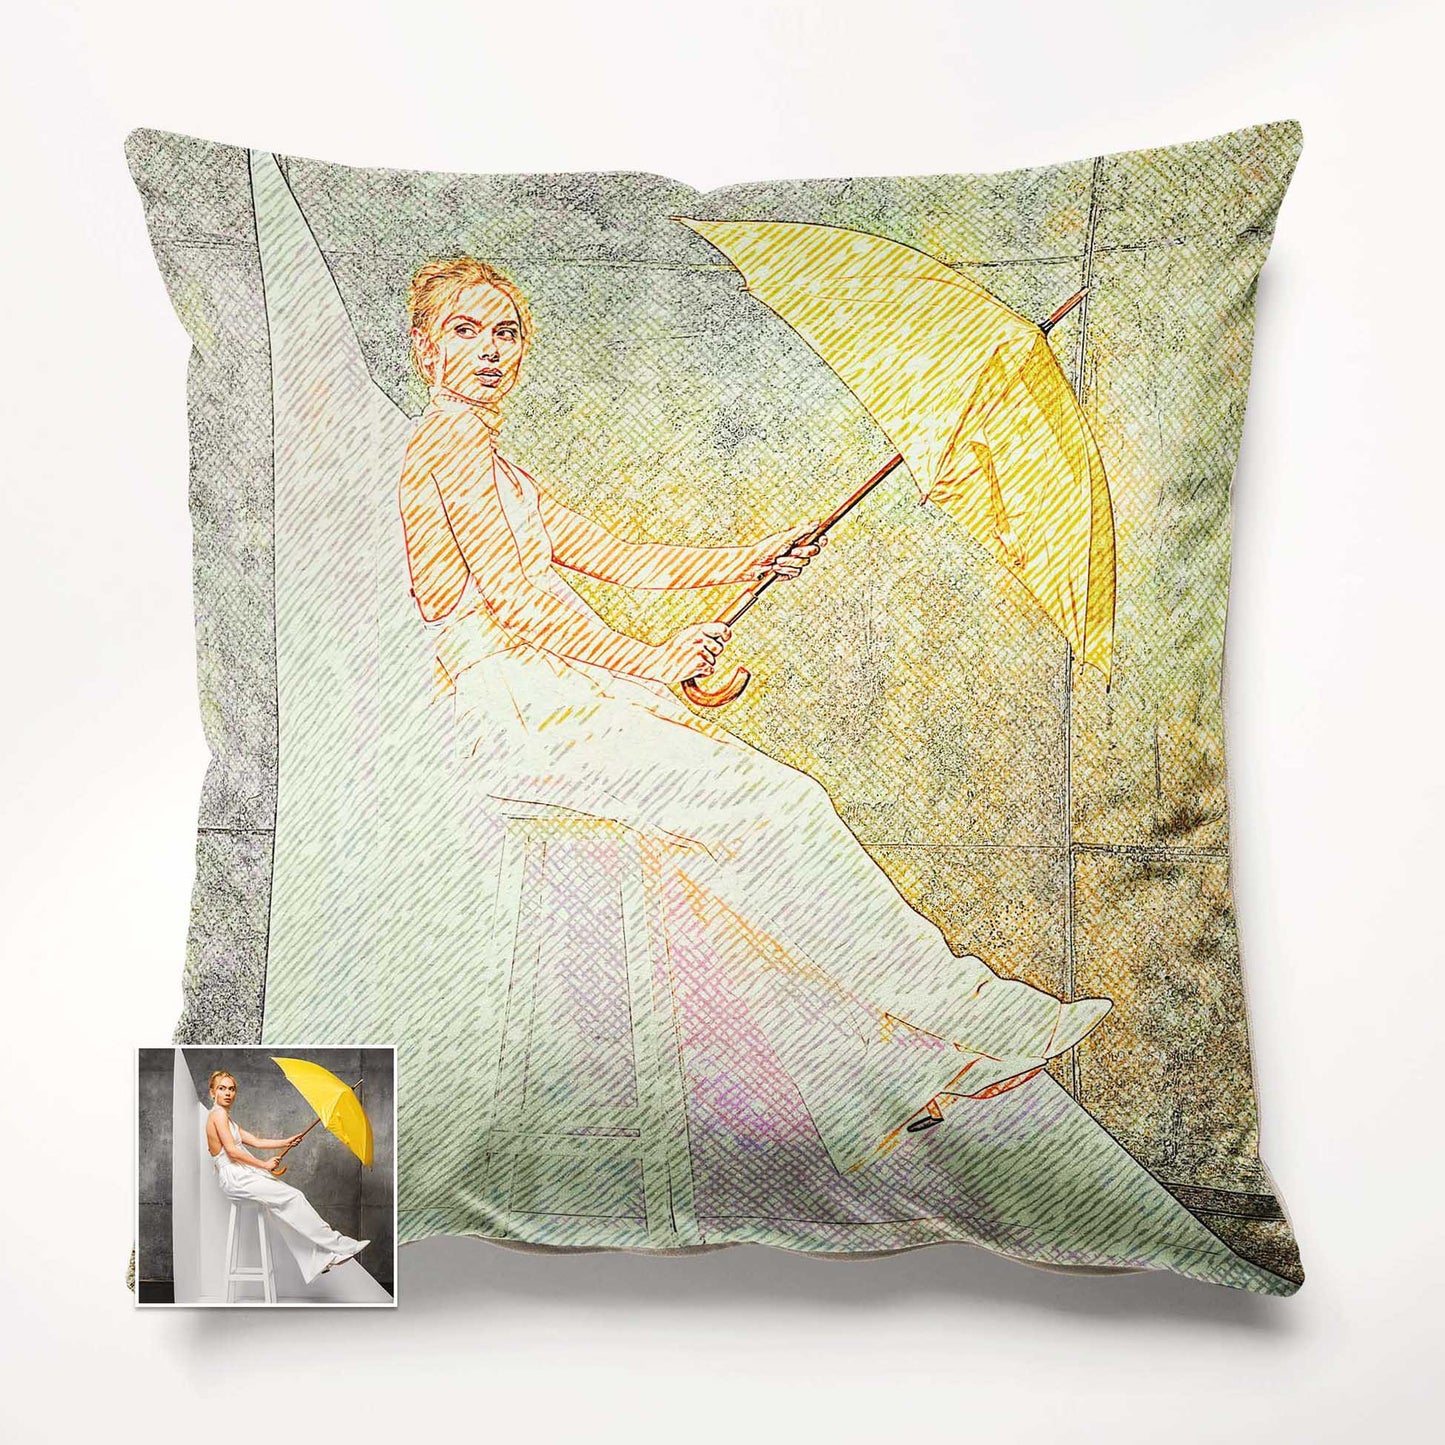 Celebrate special moments with the Personalised Drawing Crosshatch Cushion. This luxurious cushion showcases an original digital art-inspired design, printed on soft velvet for a comfortable and plush feel, vibrant and colorful print